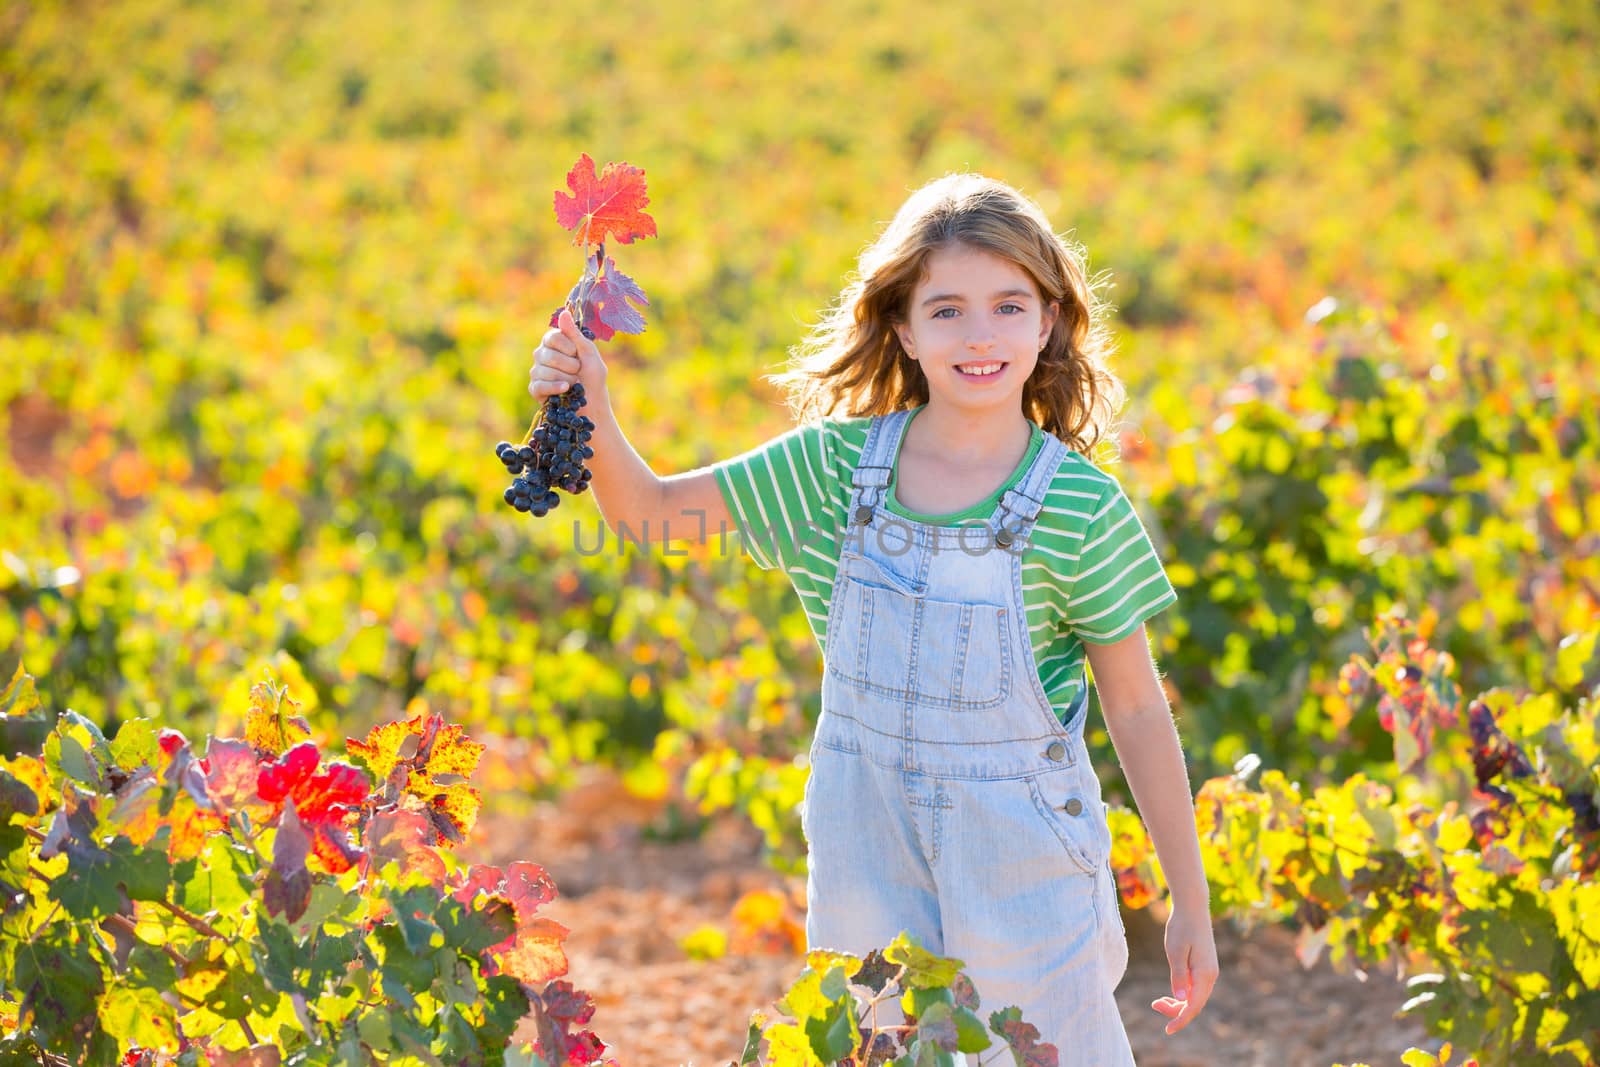 Kid girl in autumn vineyard field holding red grapes bunch by lunamarina